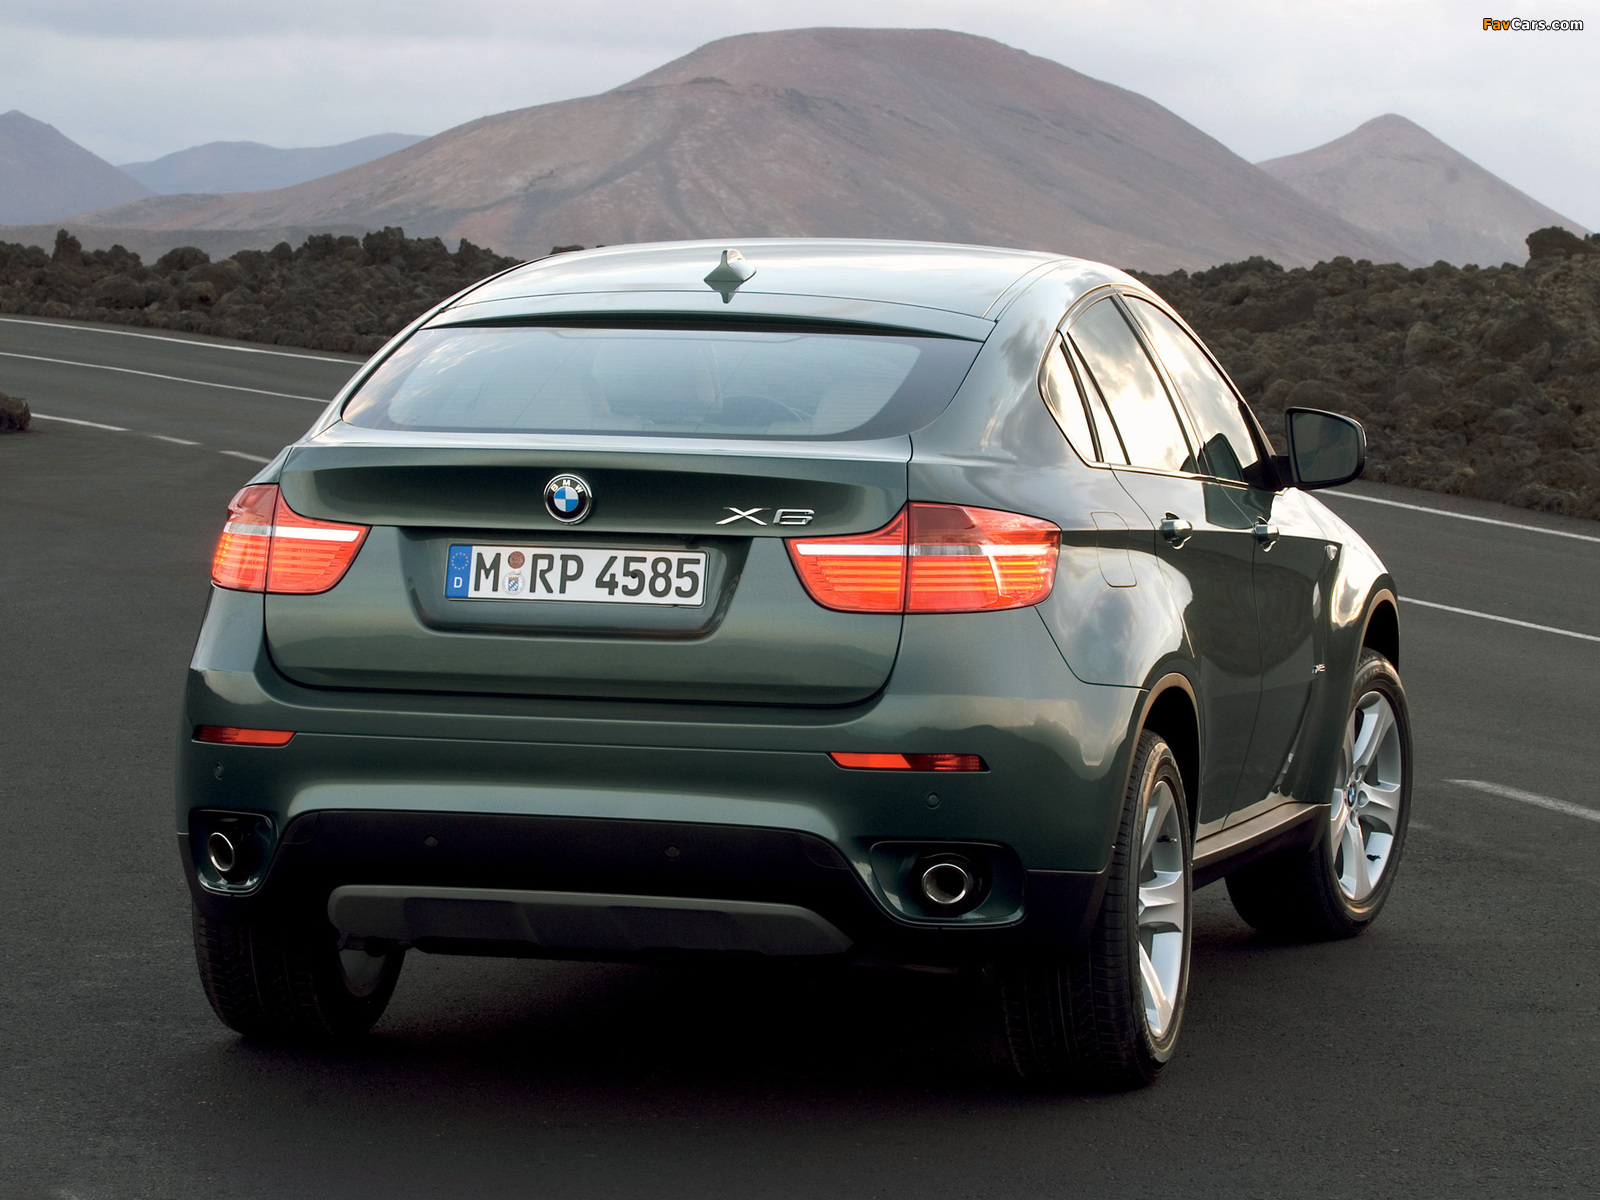 BMW X6 xDrive35d (71) 2008 pictures (1600 x 1200)